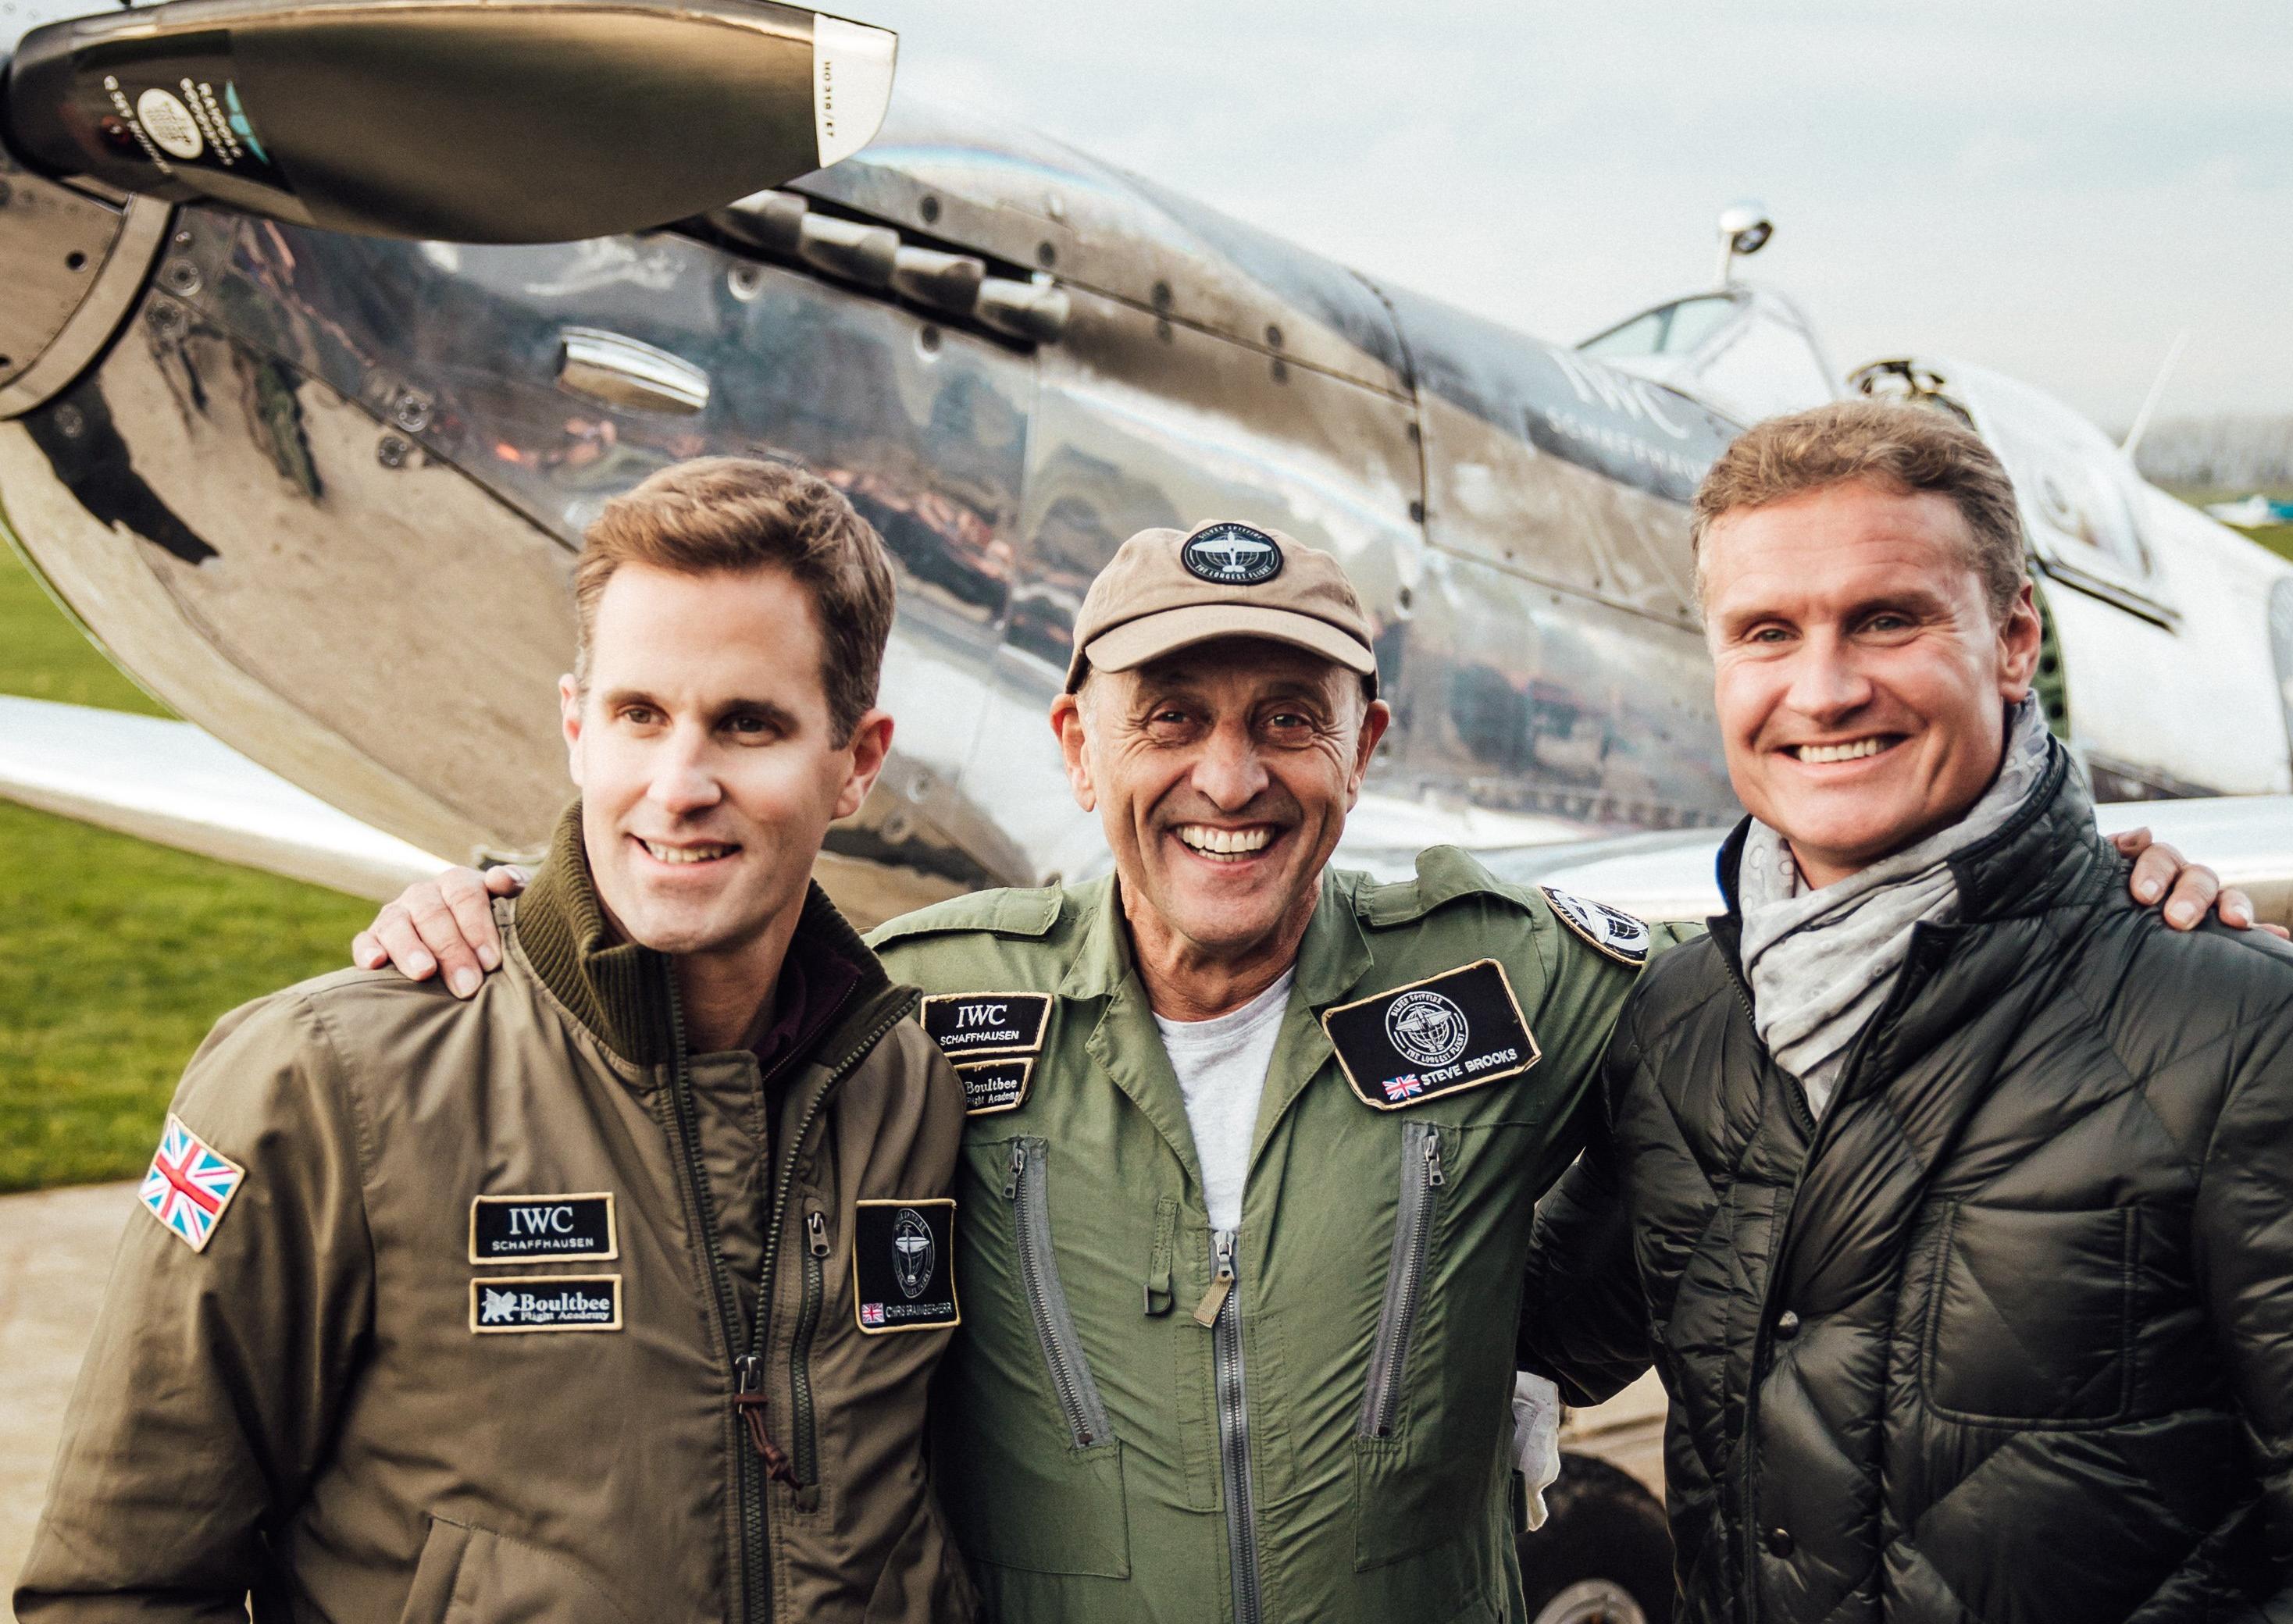 Formula 1 driver and IWC brand ambassador David Coulthard greeted the two Goodwood pilots after they landed back home after flying a Silver Spitfire around the world in four months. Photo by Christopher Busch for IWC Schaffhausen SUS-190512-175601001